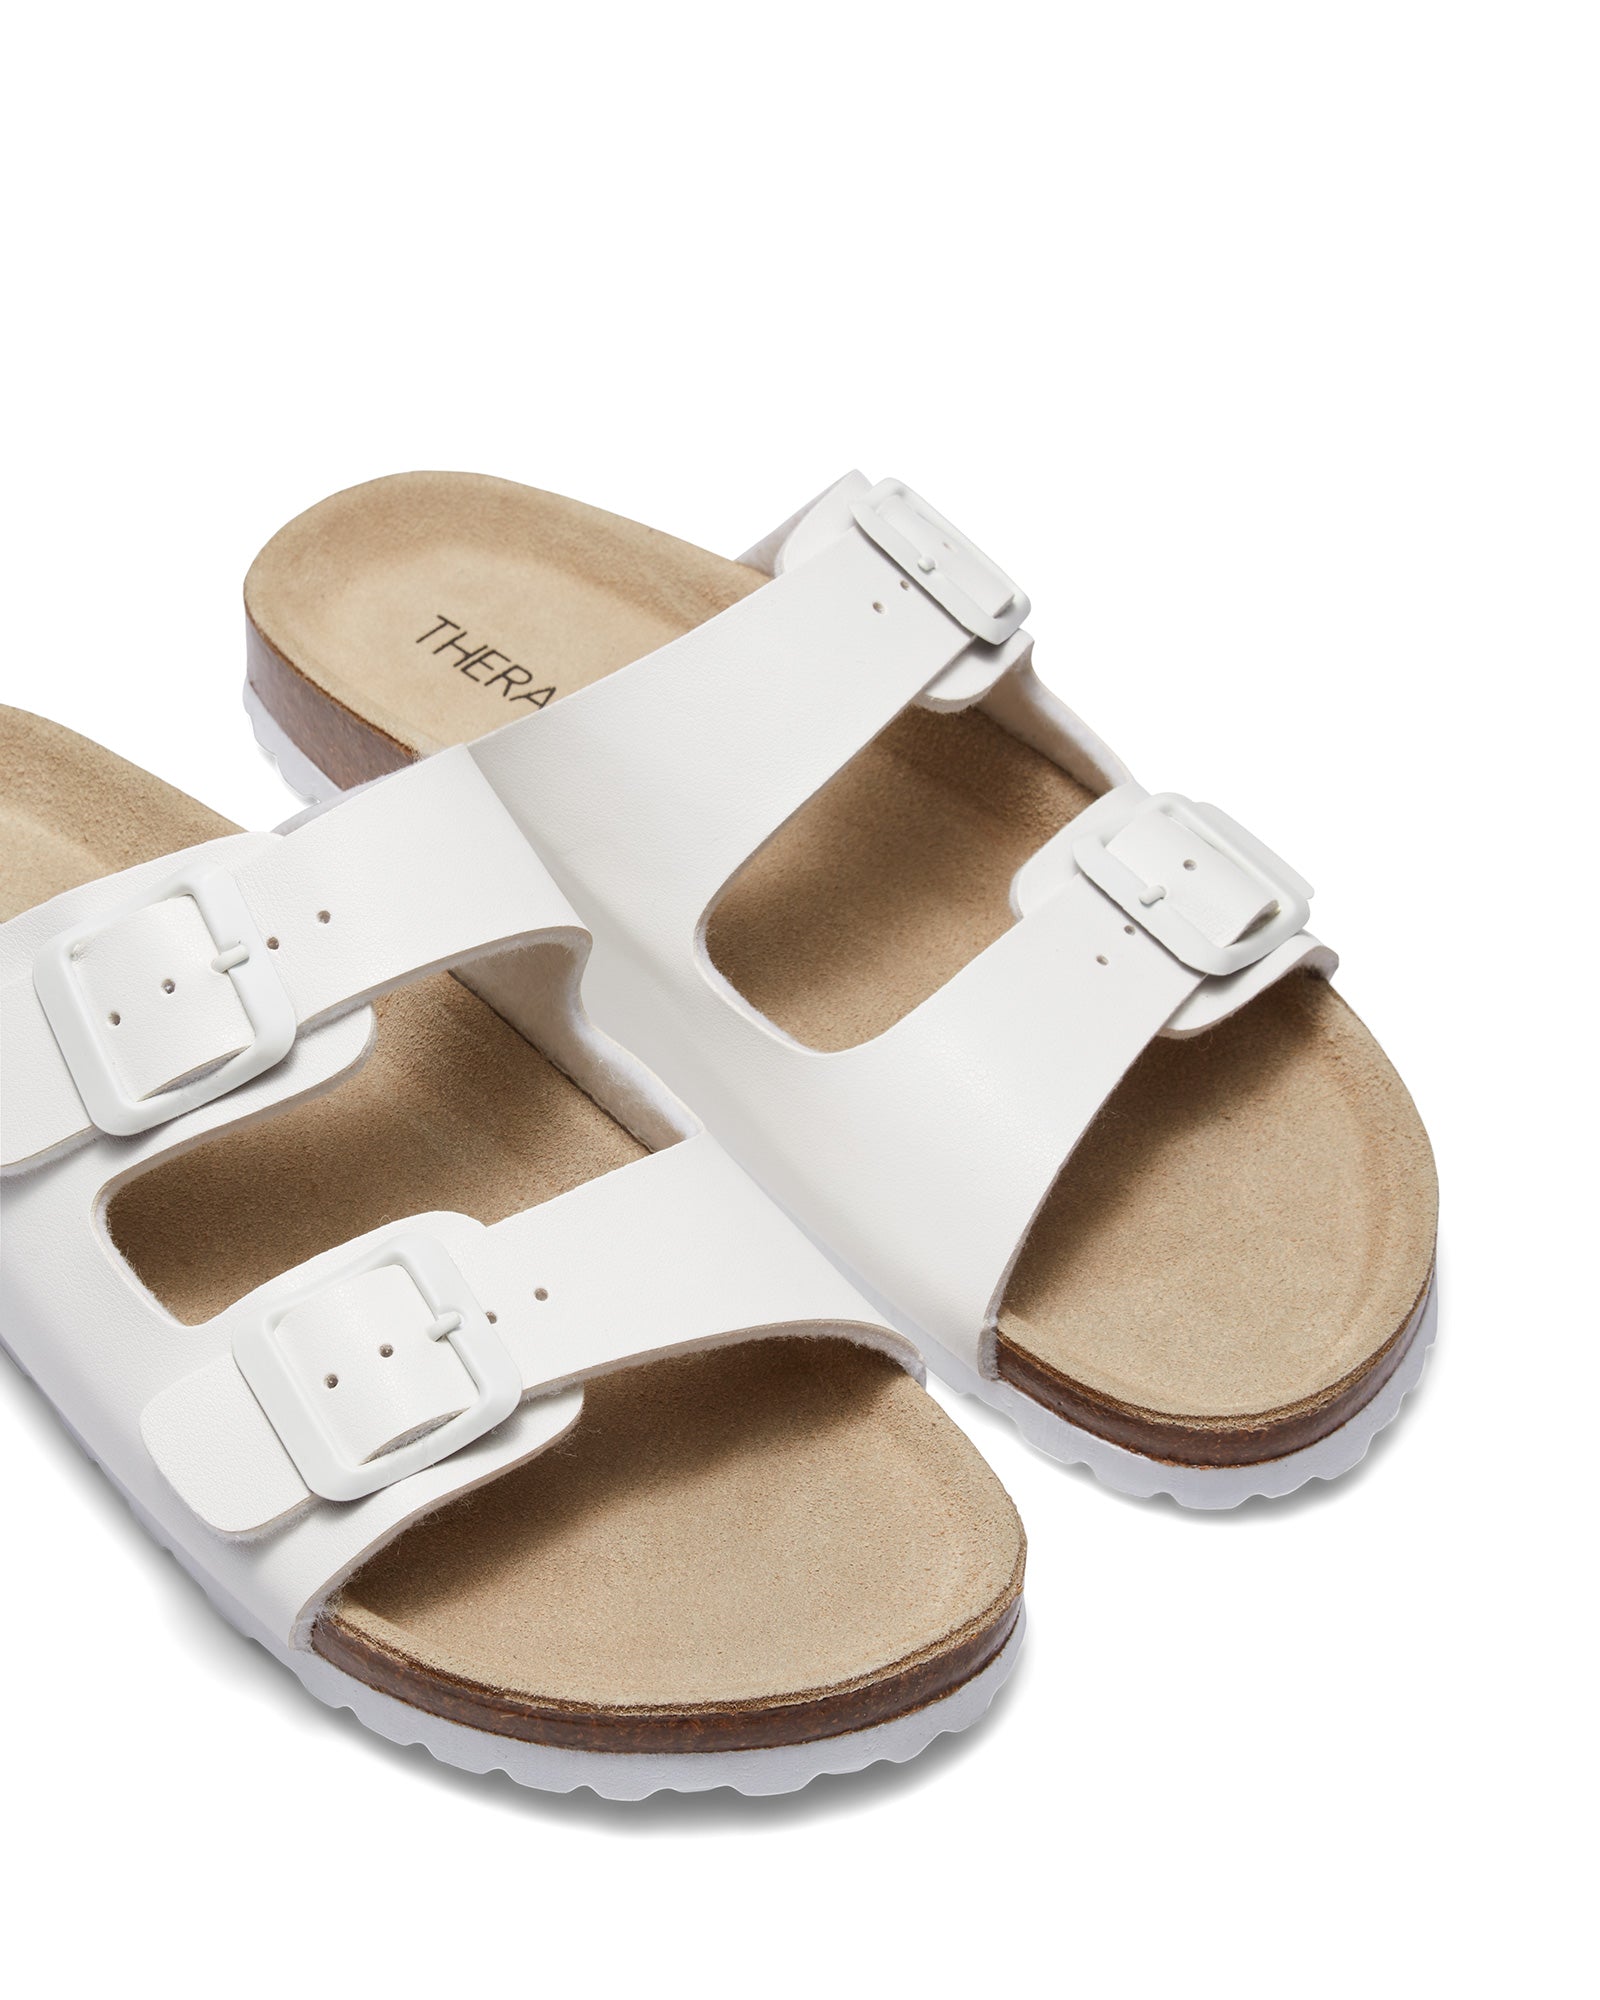 Therapy Shoes Stila White | Women's Slides | Sandals | Flats | Buckle